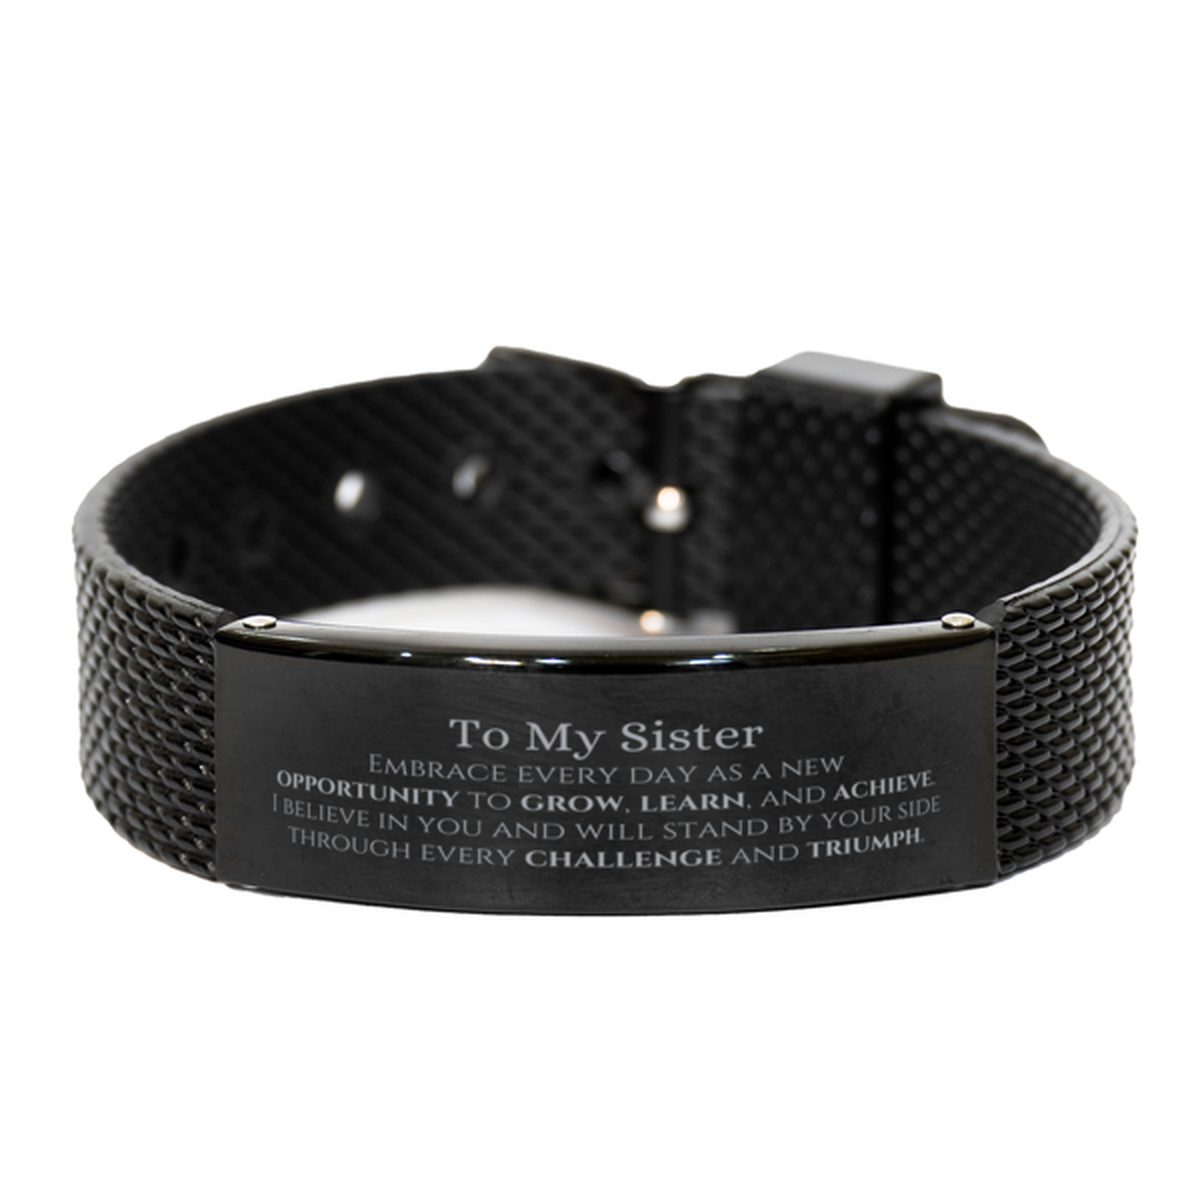 To My Sister Gifts, I believe in you and will stand by your side, Inspirational Black Shark Mesh Bracelet For Sister, Birthday Christmas Motivational Sister Gifts